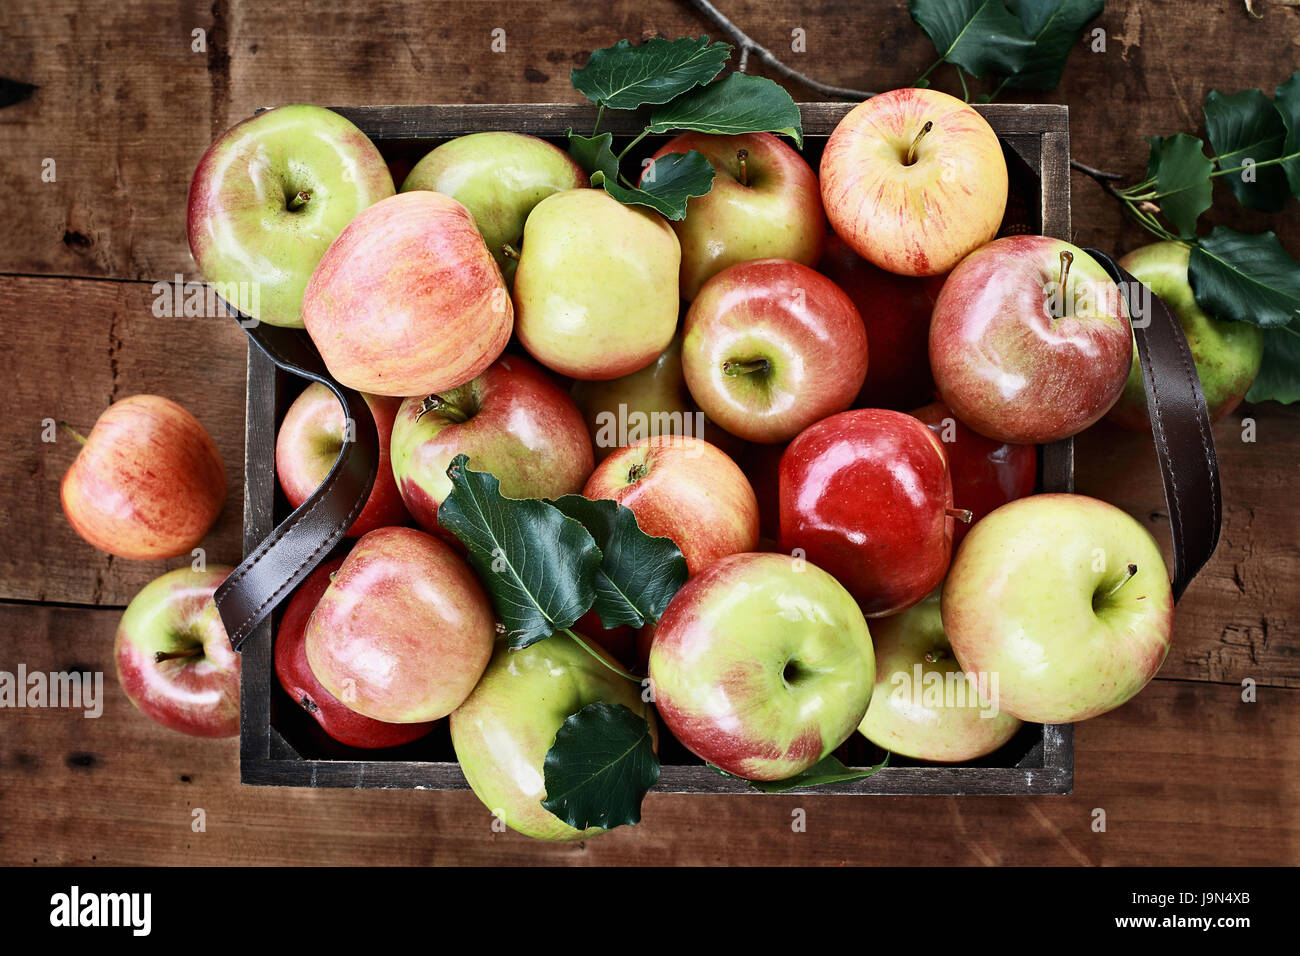 Freshly picked bushel of apples in an old vintage wooden crate with leather handles on a rustic wood table. Image shot from above. Stock Photo